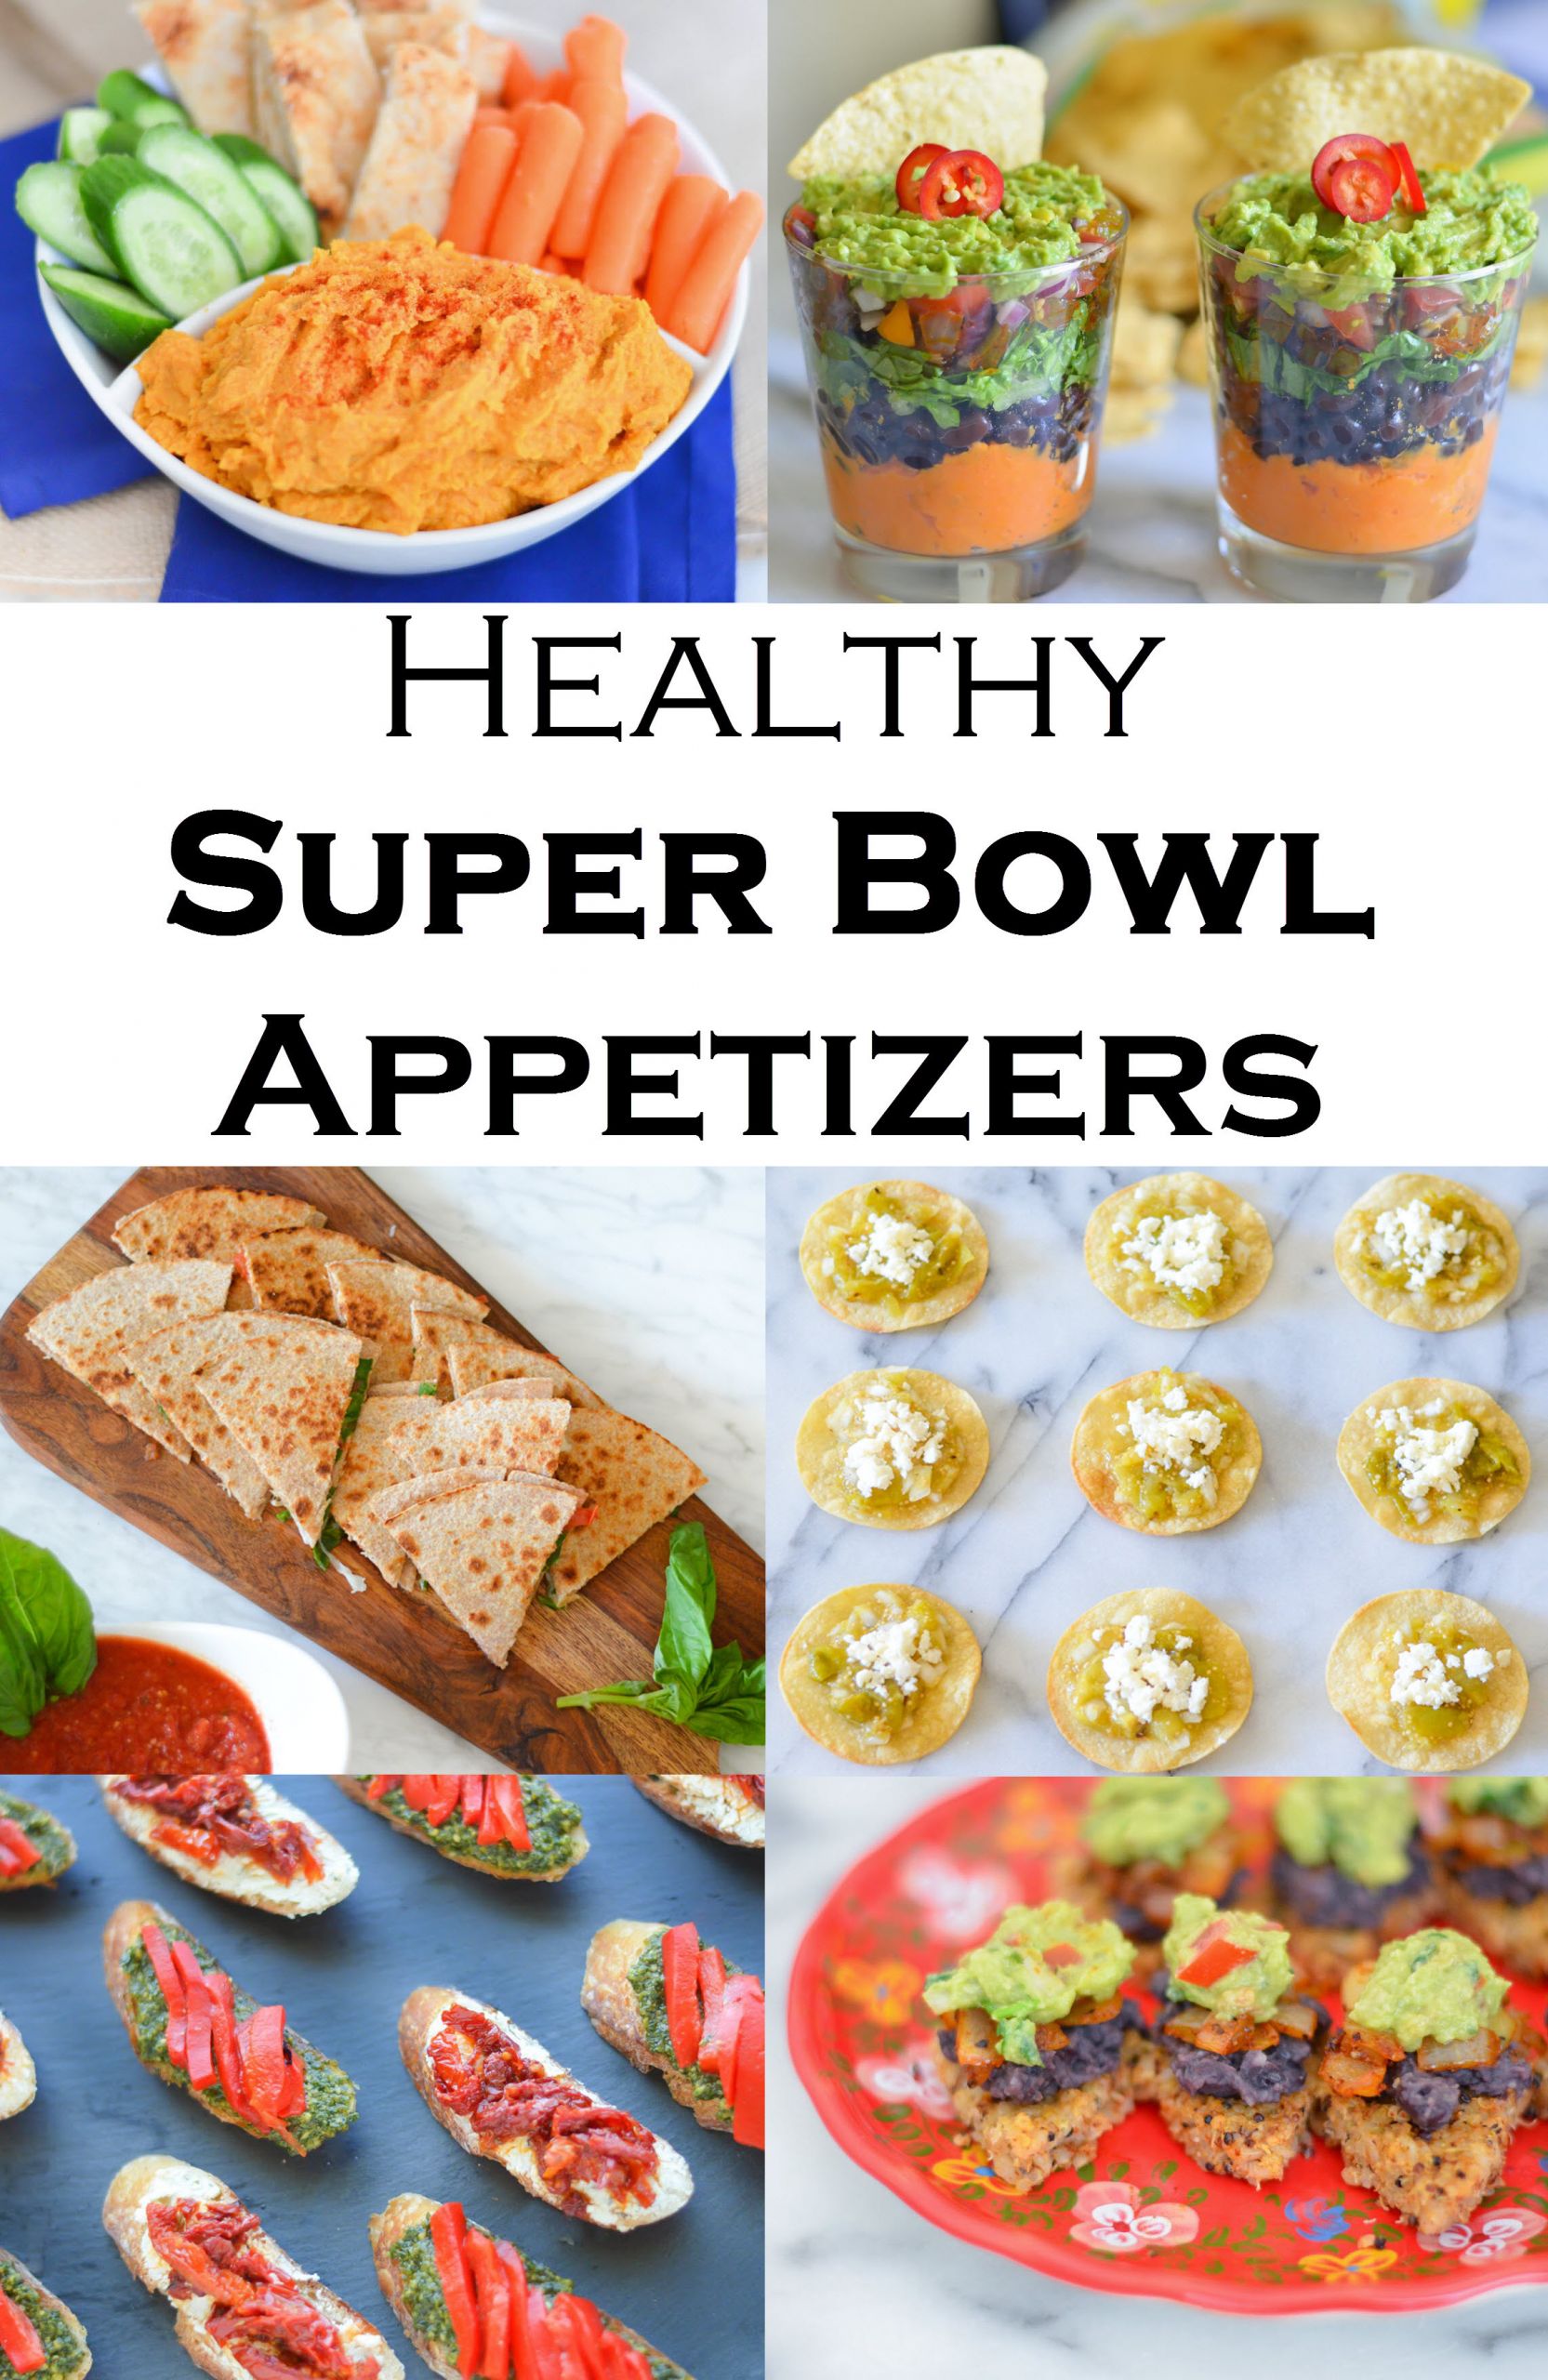 Super Bowl Healthy Appetizers
 Healthy Super Bowl Recipes For Everyone